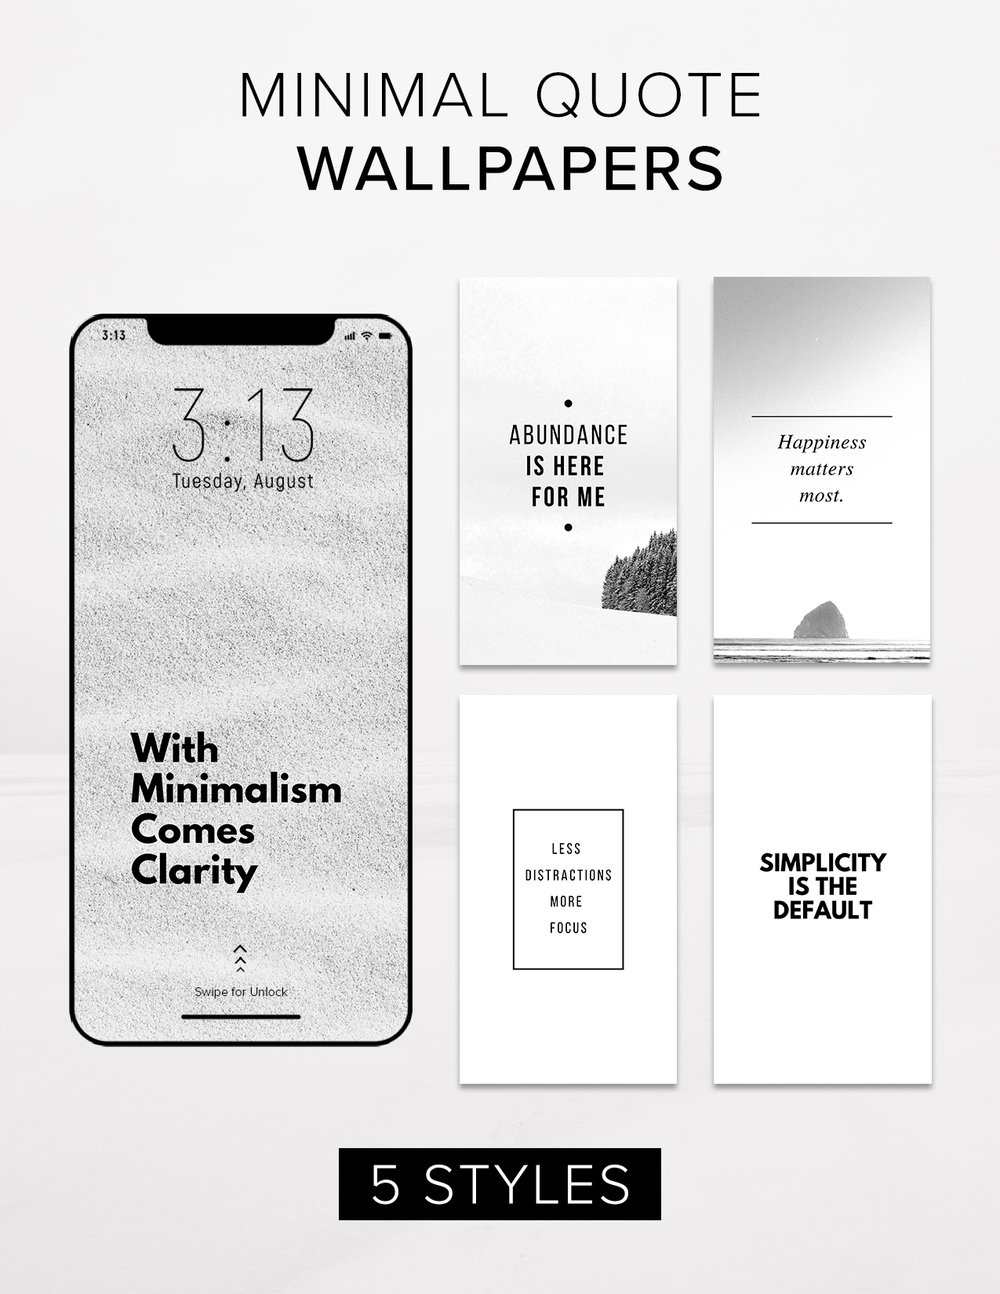 white iphone wallpaper,text,product,font,brand,diagram